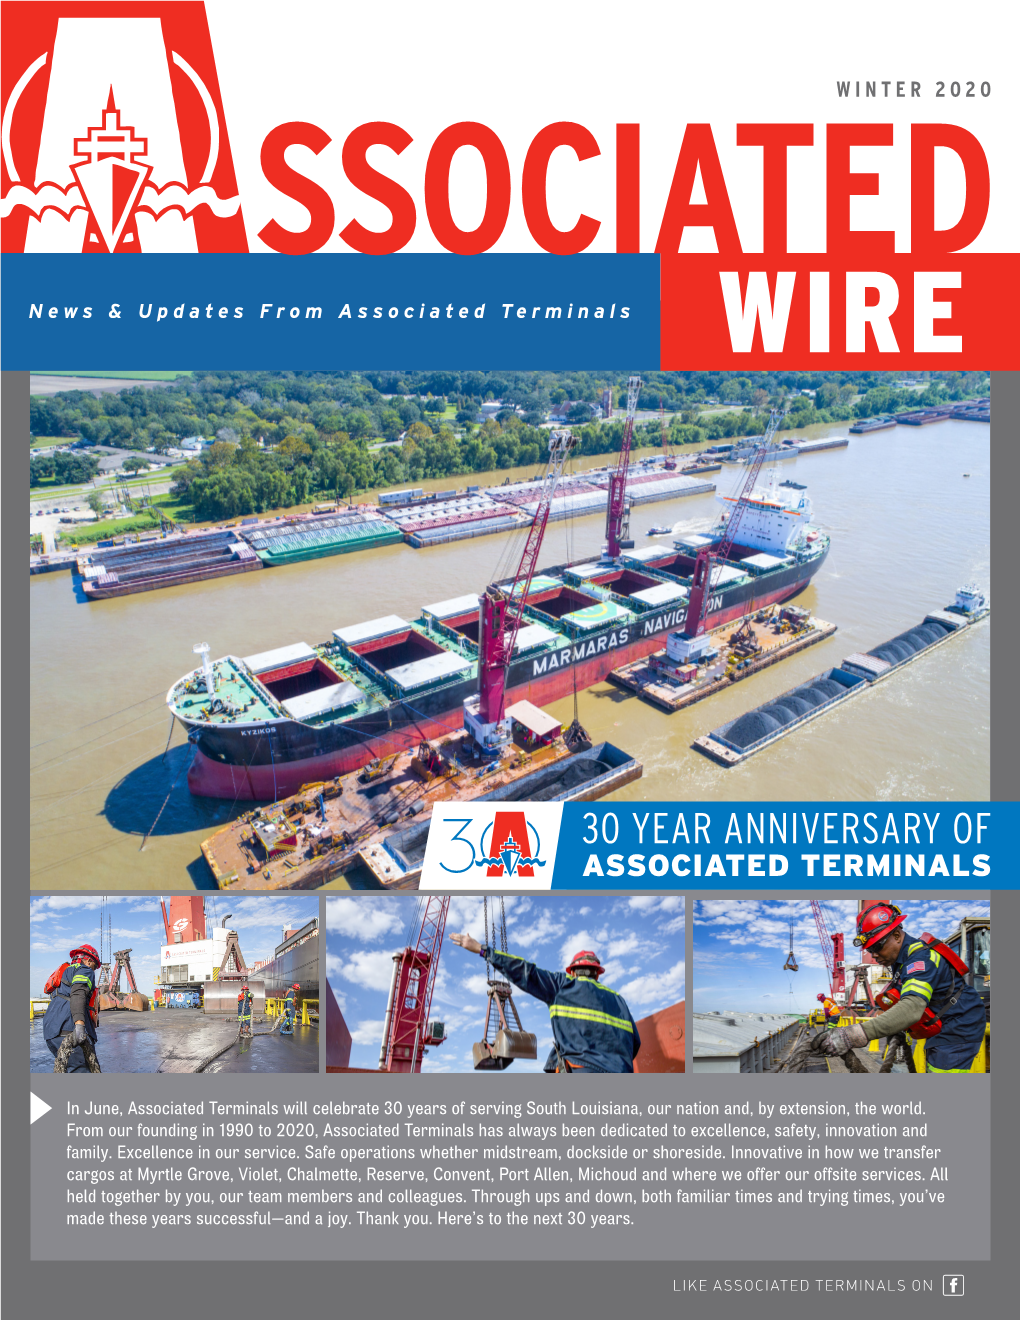 30 Year Anniversary of Associated Terminals